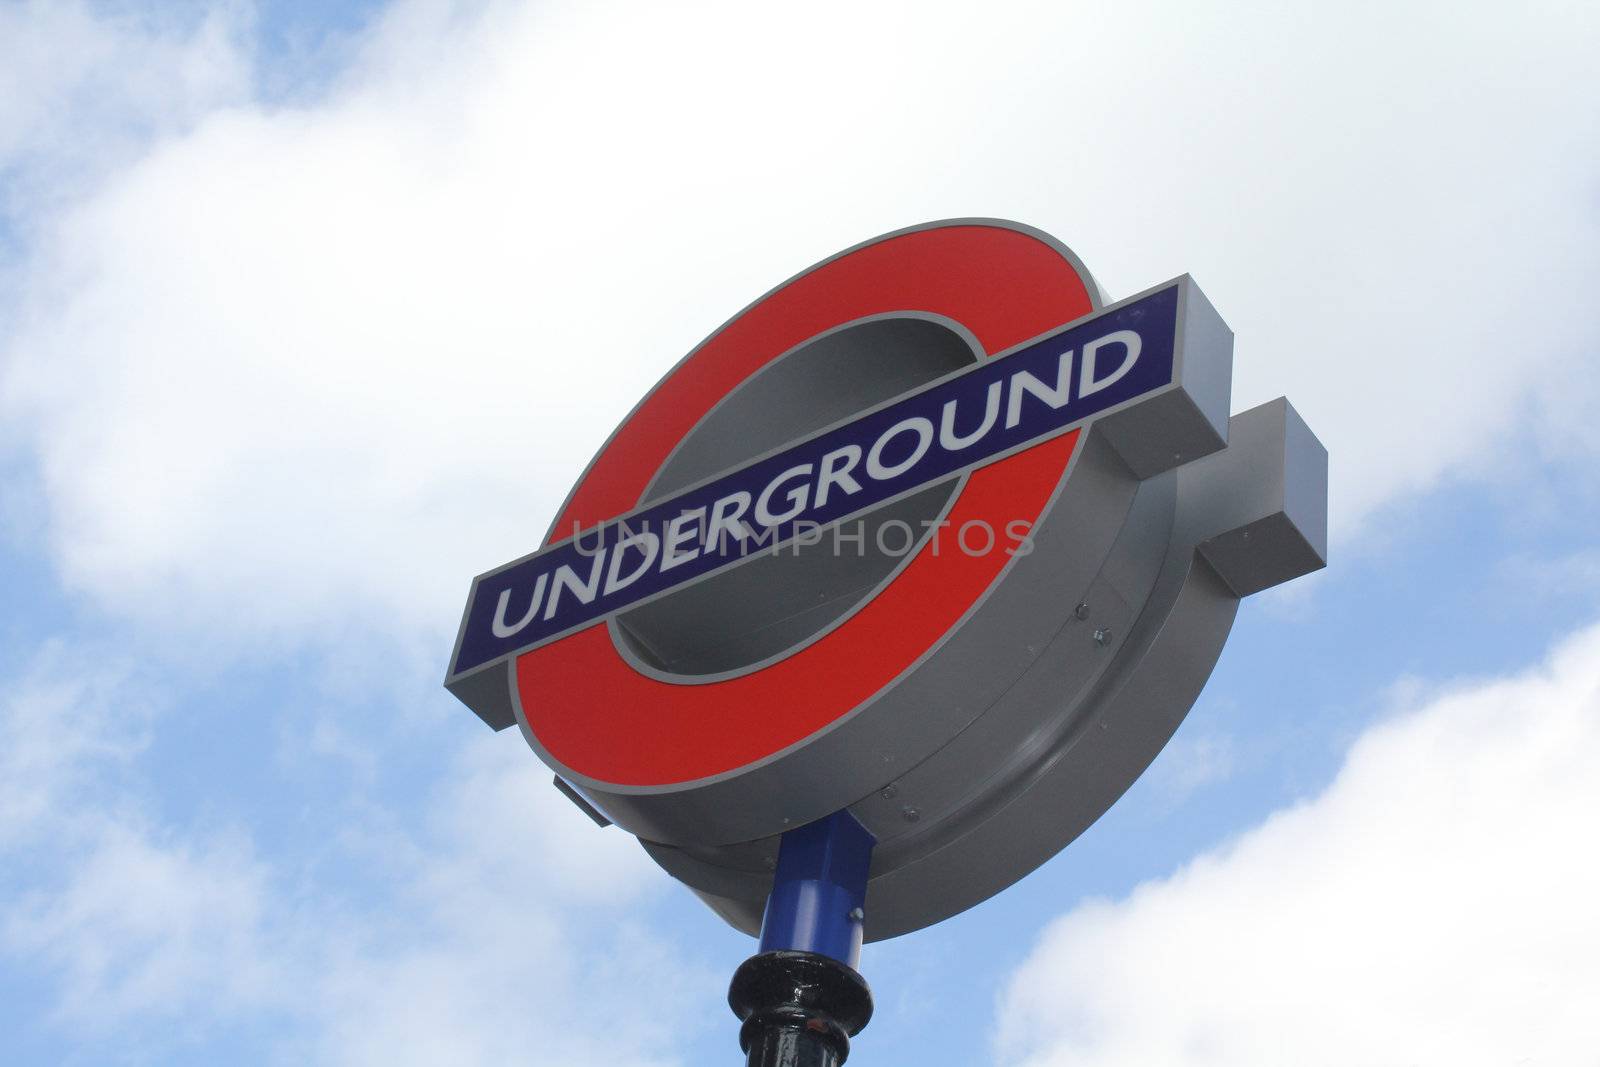 london underground sign for the tubes